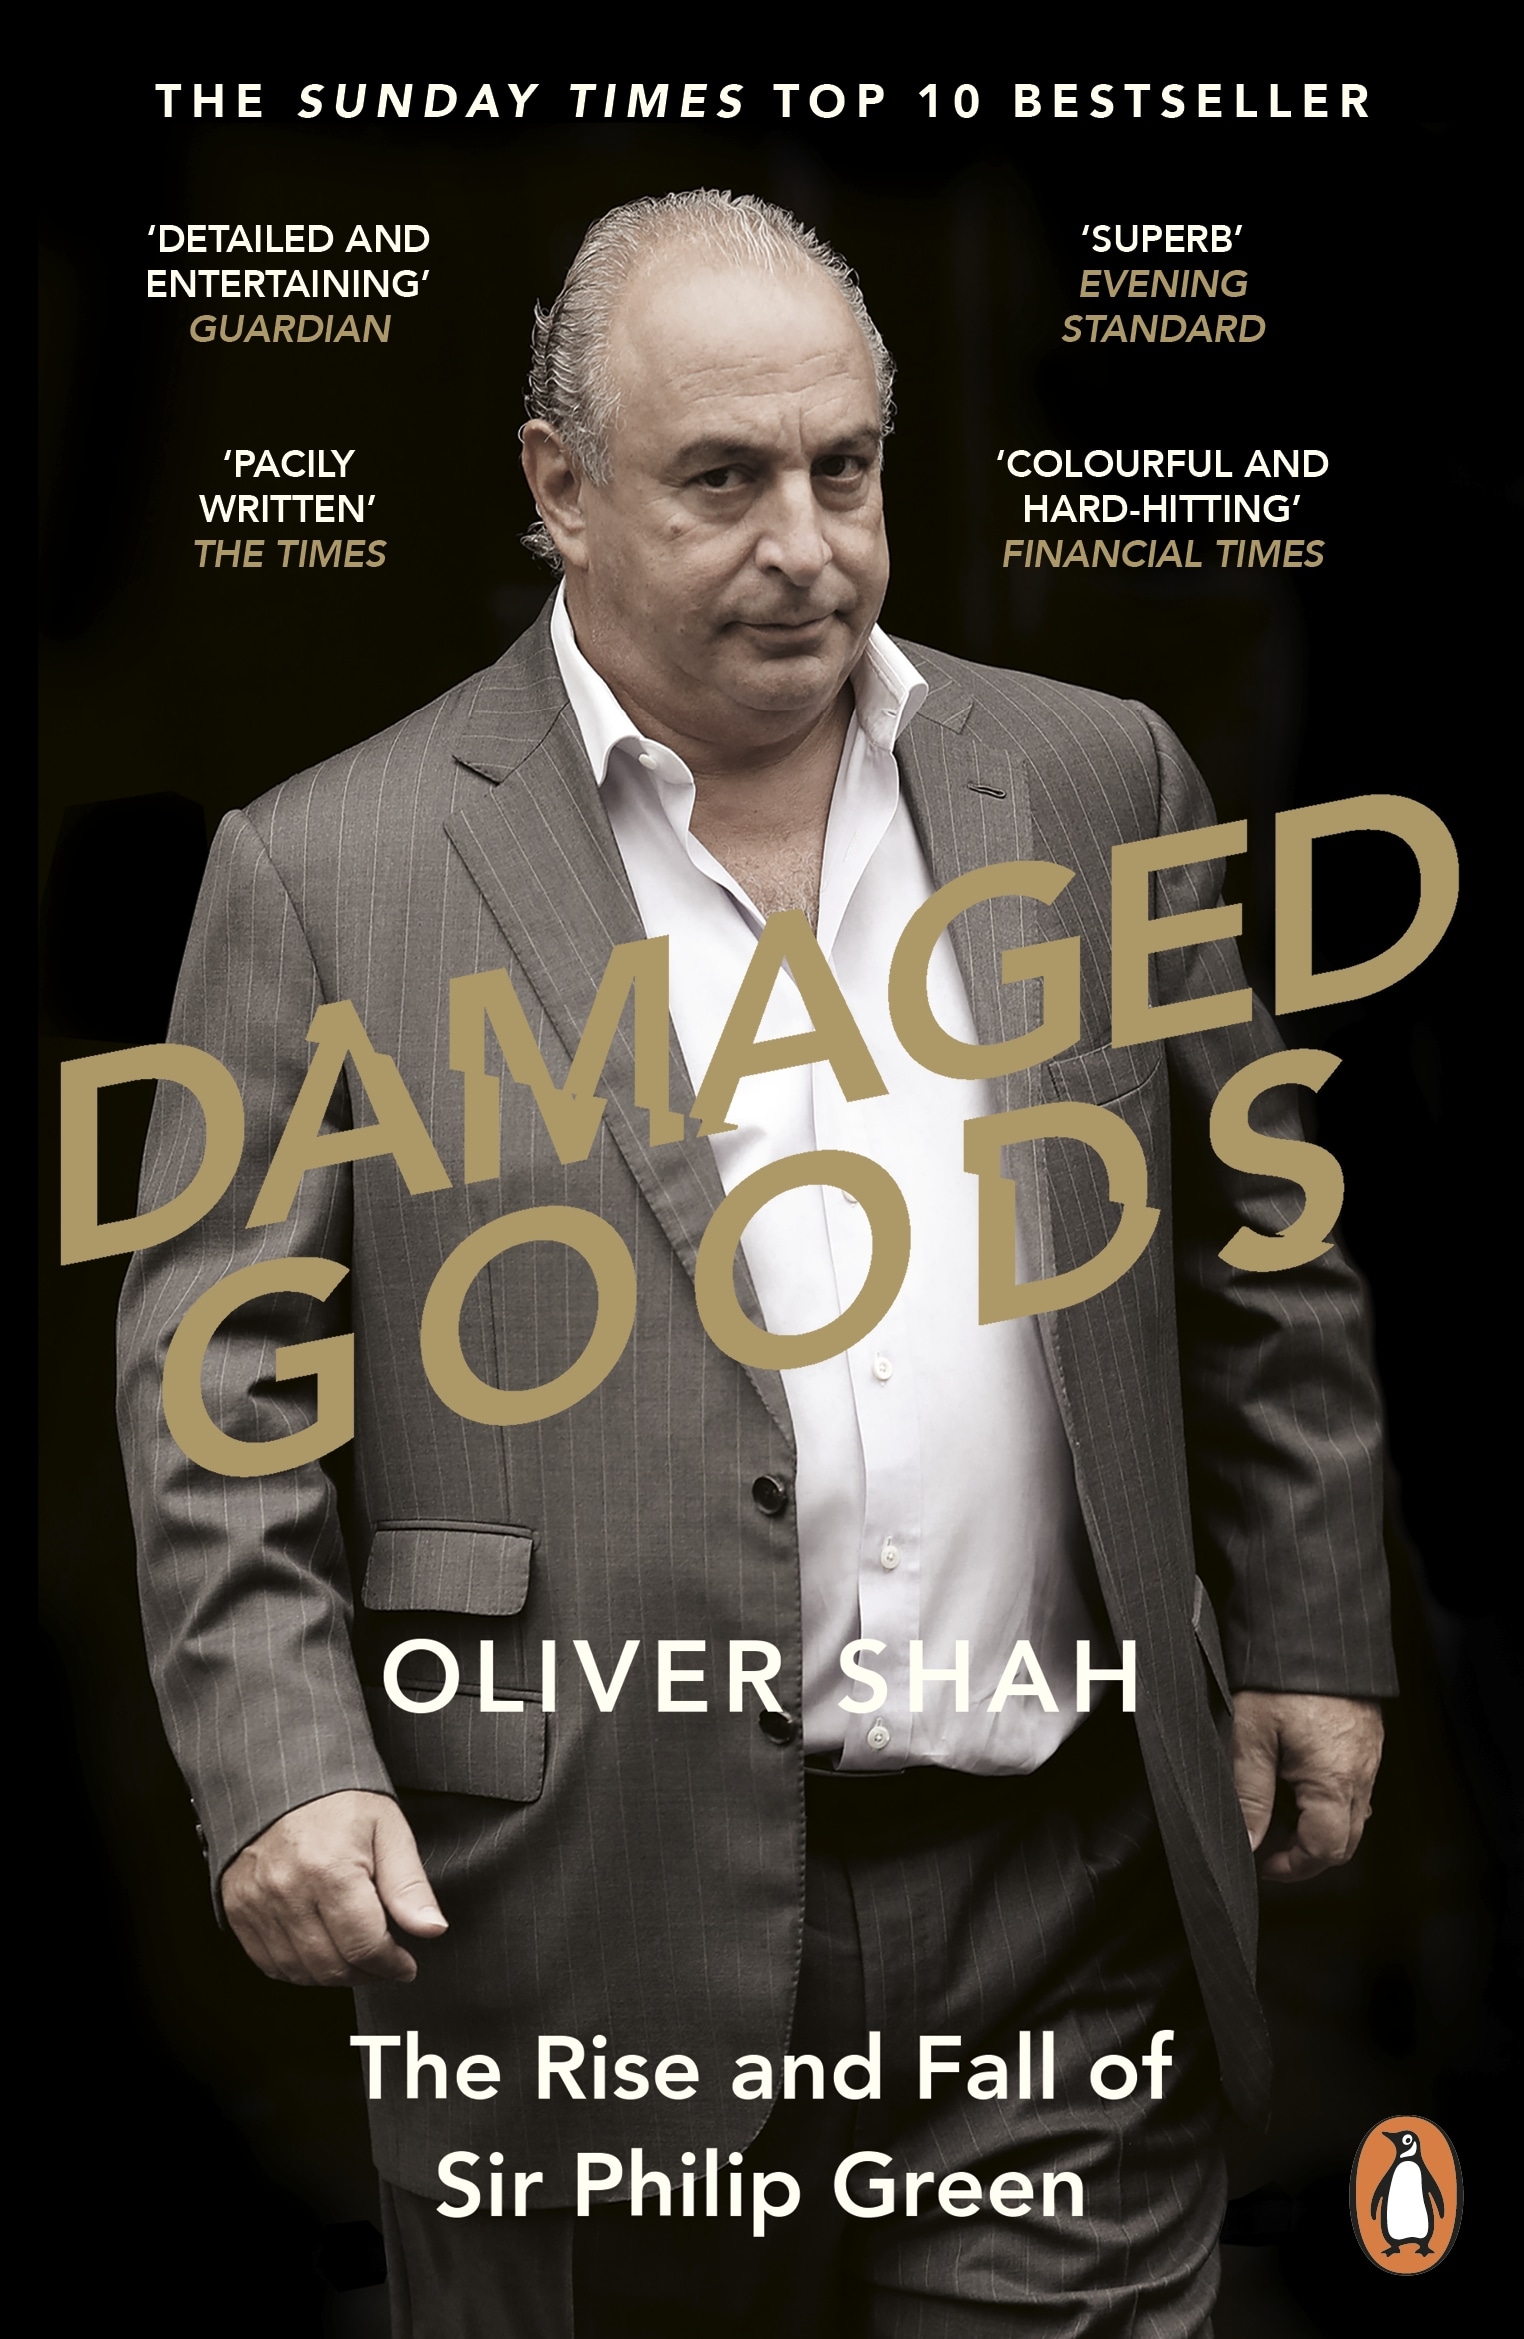 Book “Damaged Goods” by Oliver Shah — March 28, 2019